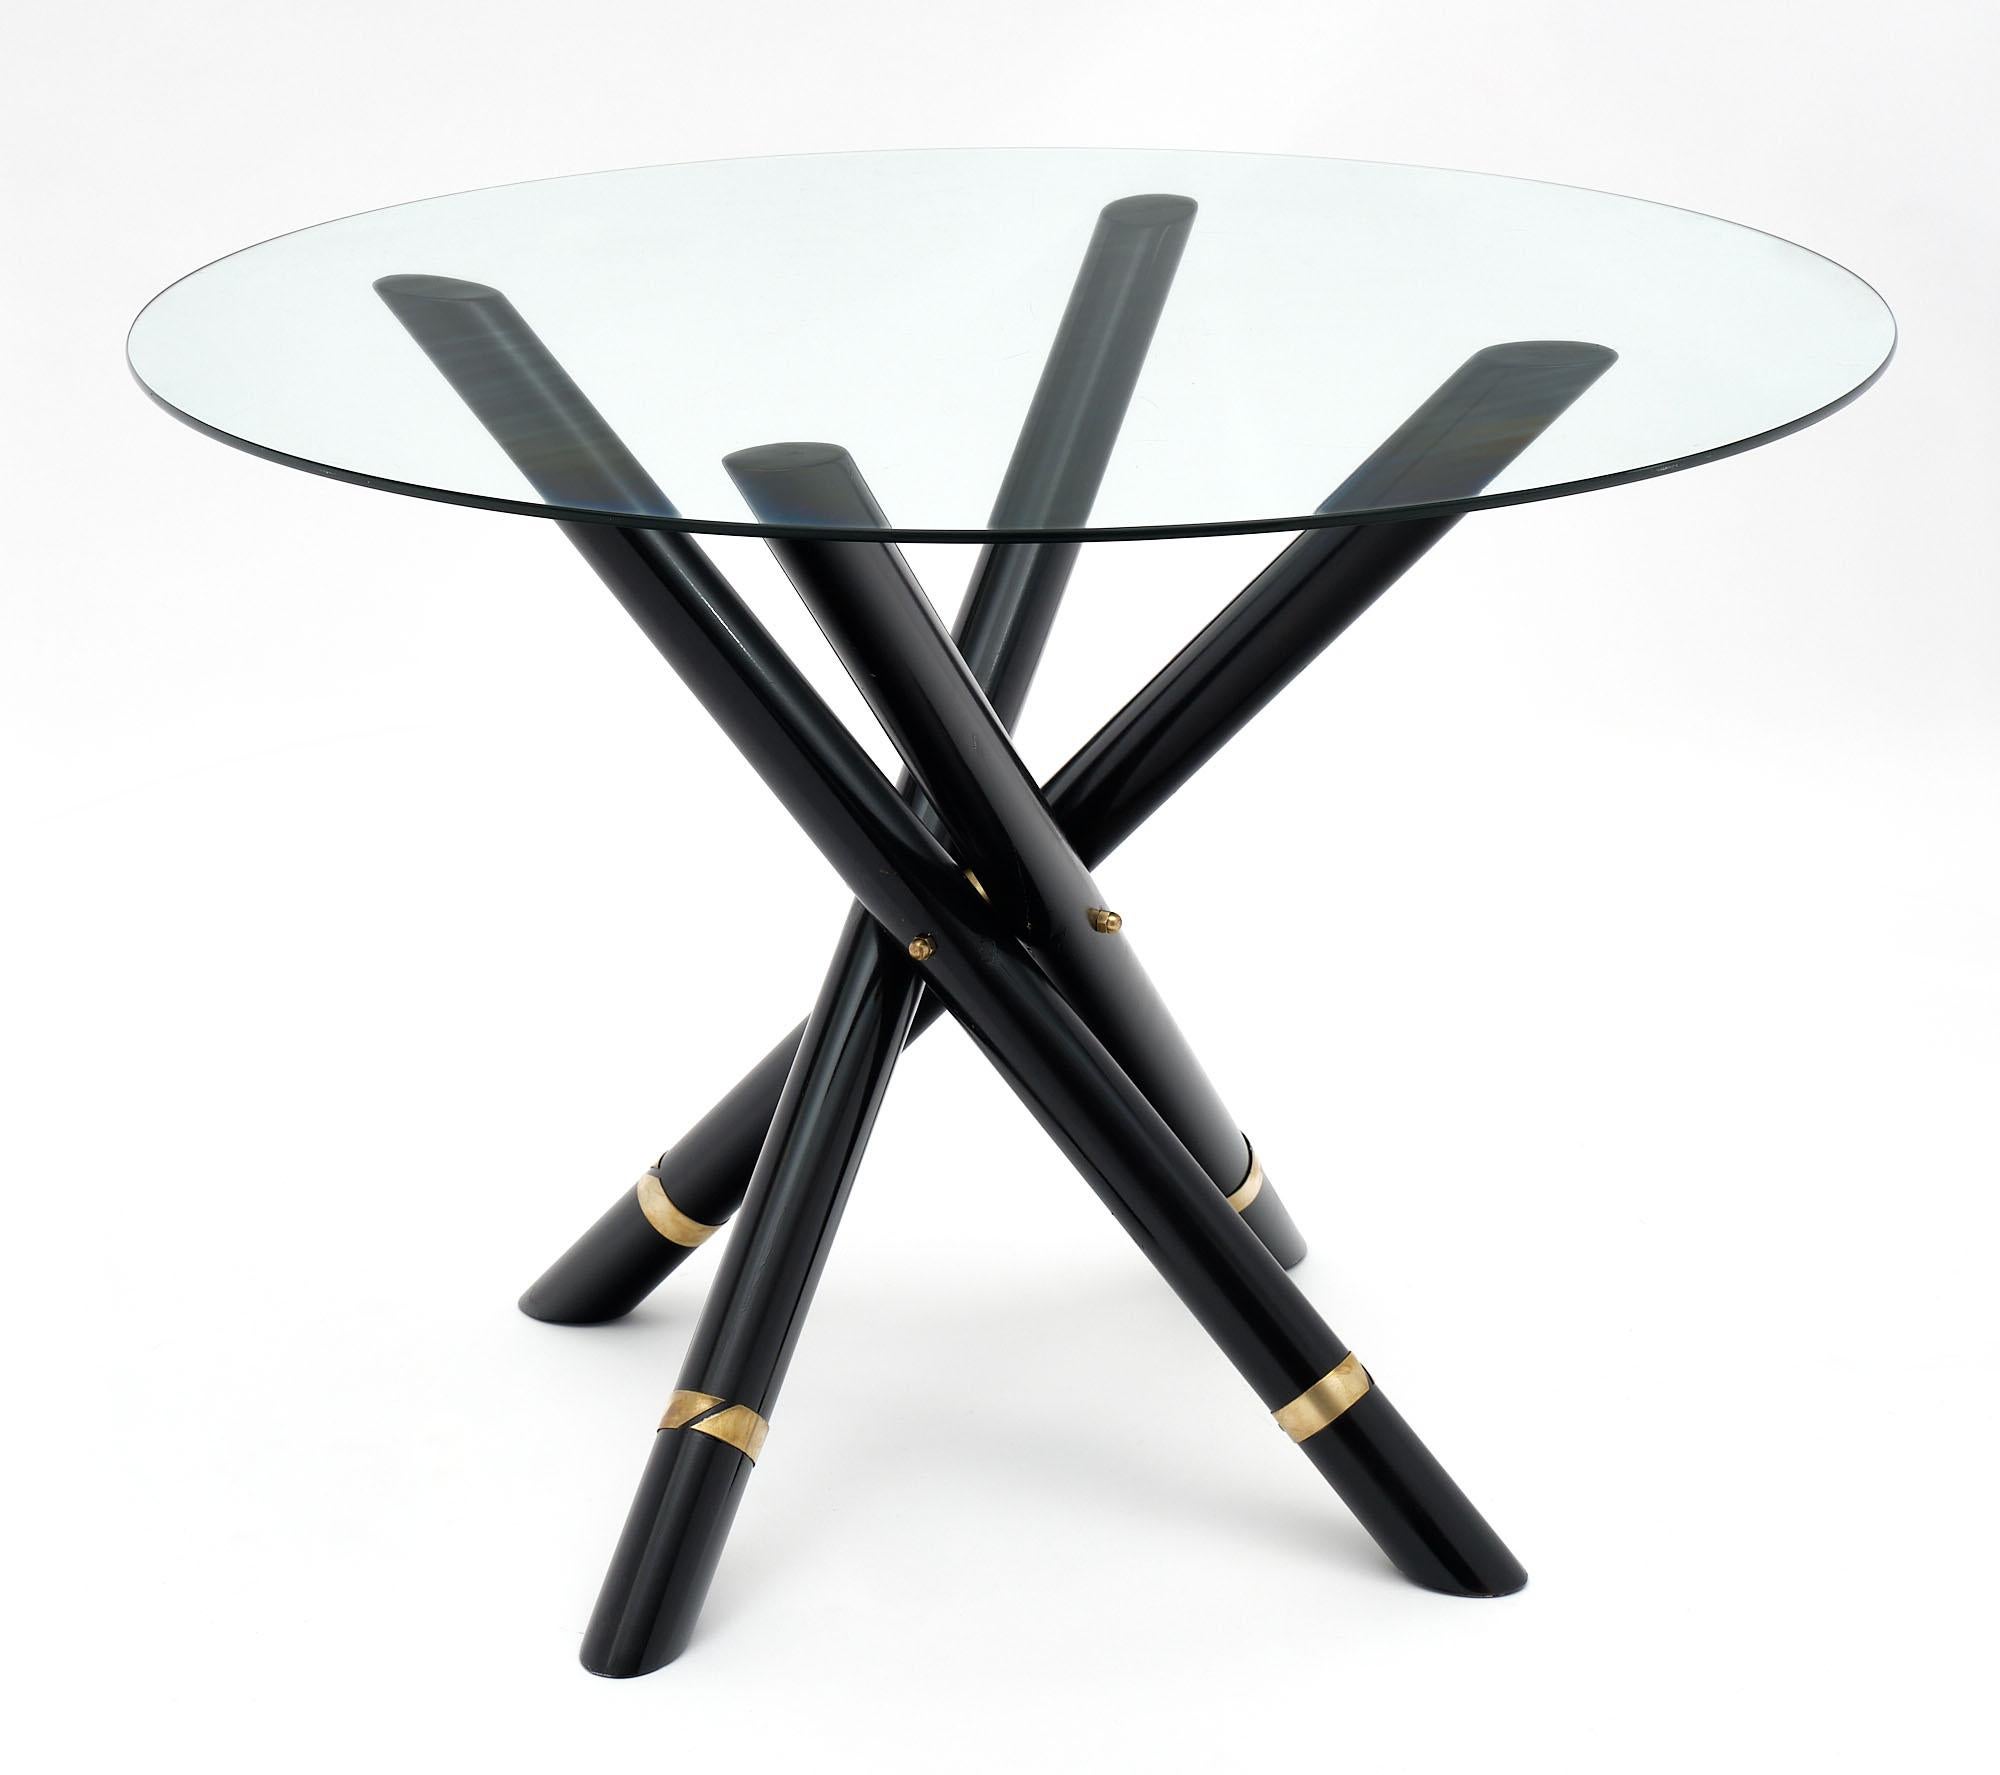 Round dining table or gueridon from France featuring a foldable base with four black lacquered steel tubes enhanced with a gilt brass ring. The top is glass.